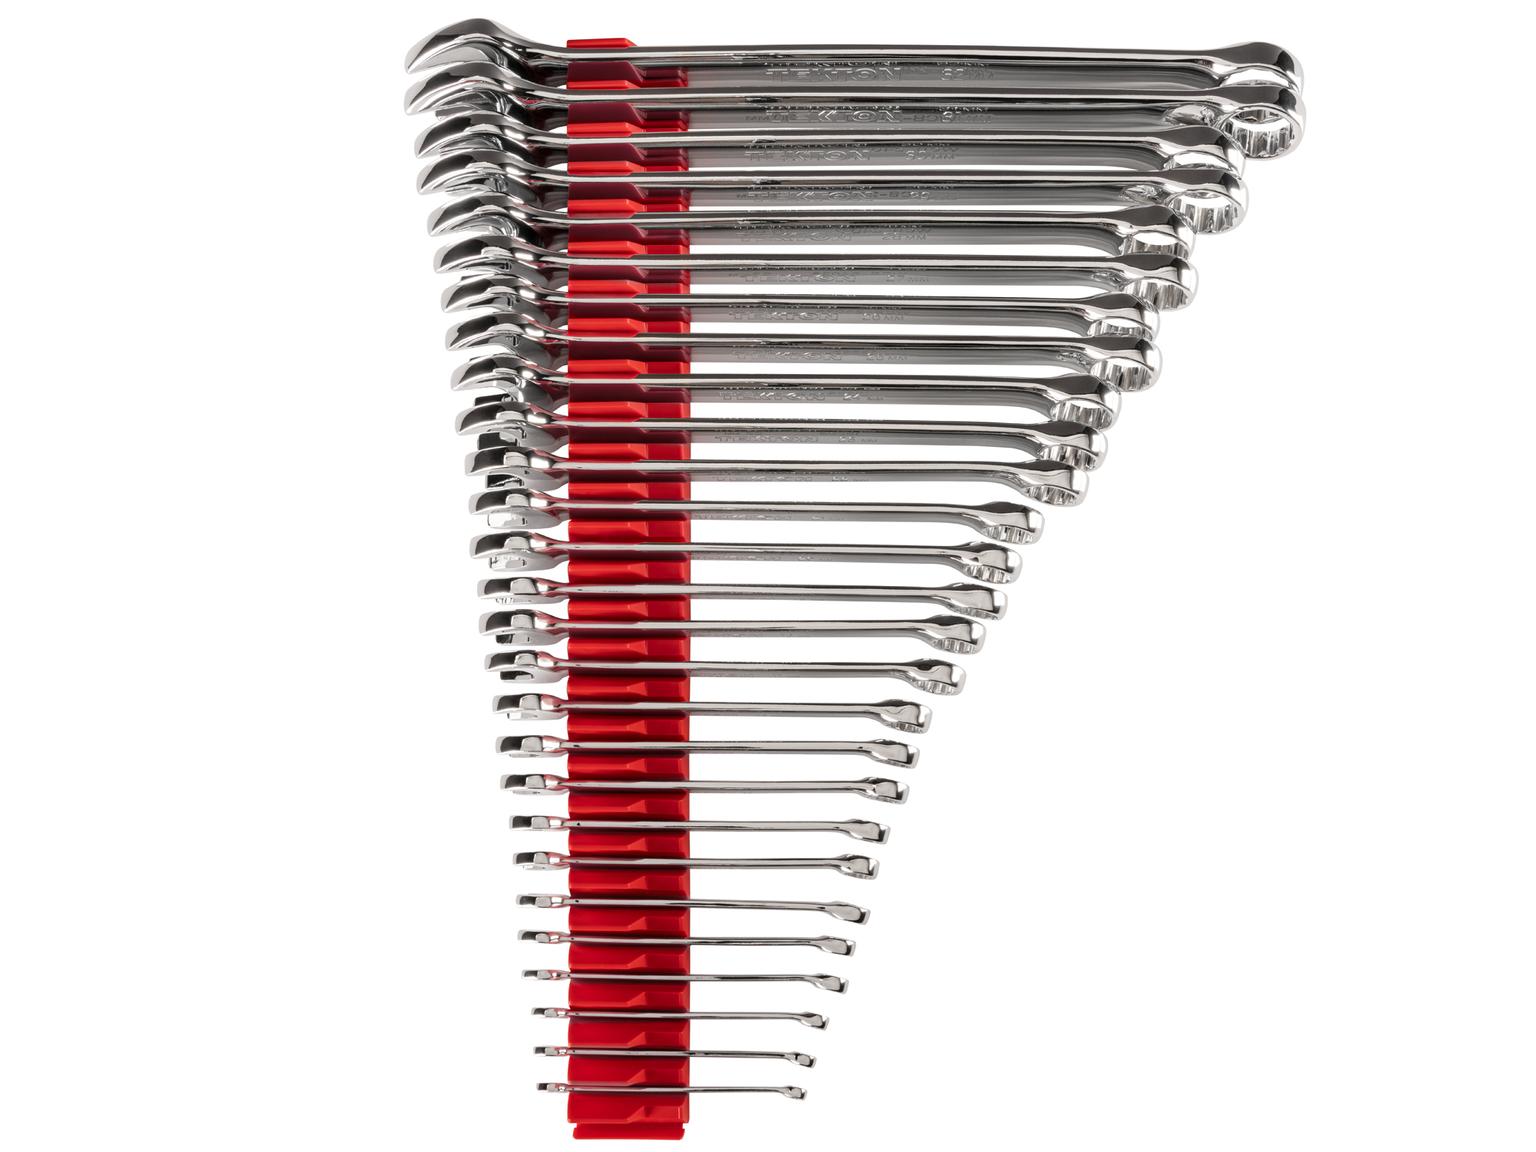 TEKTON WCB95203-T Combination Wrench Set with Modular Slotted Organizer, 27-Piece (6 - 32 mm)